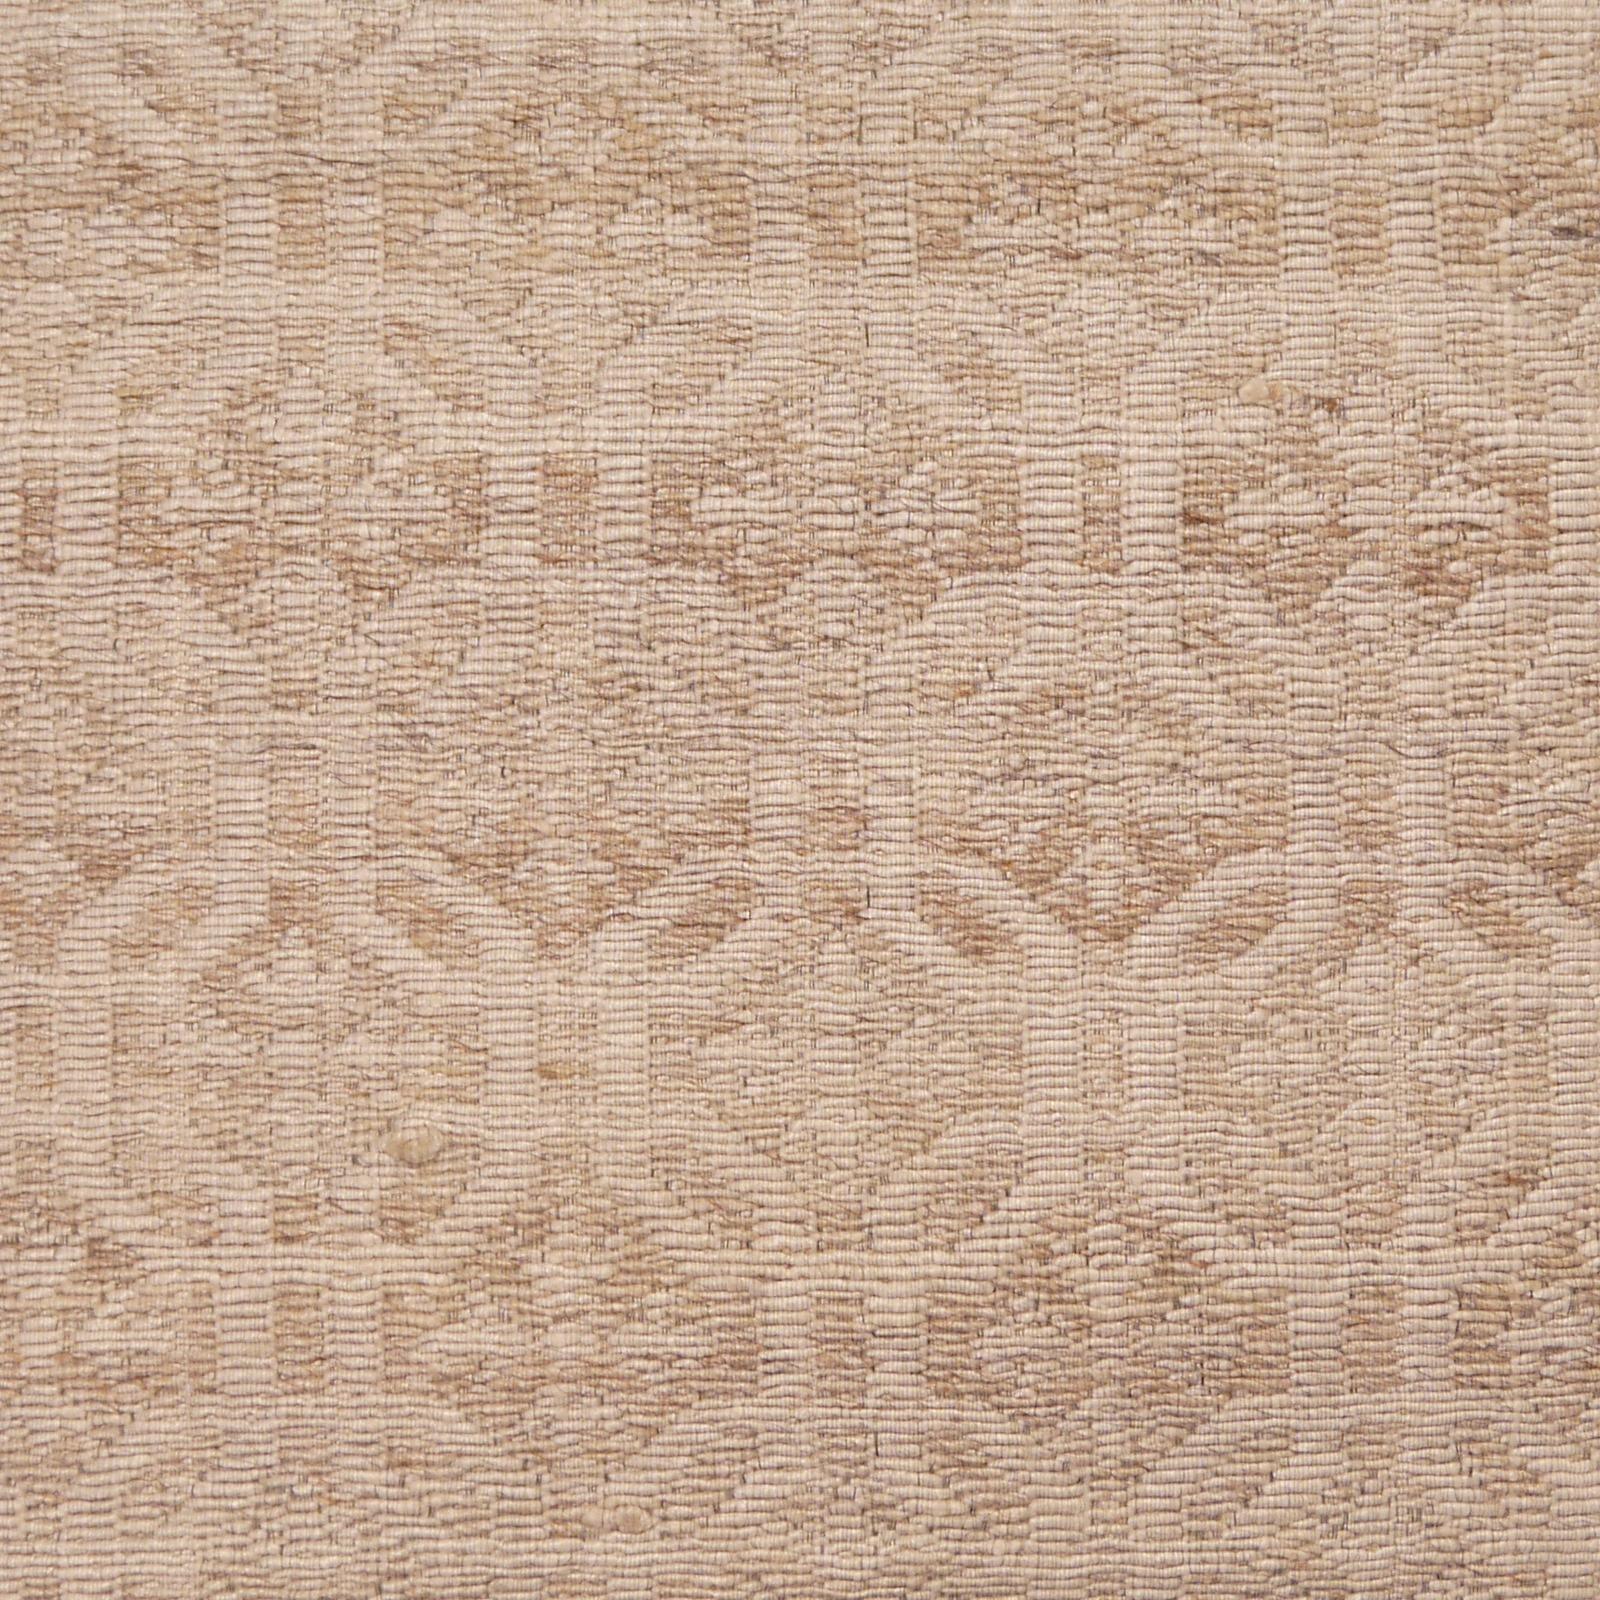 Hand-Woven Handwoven Jacquard Pillow Cover in Beige or Sand